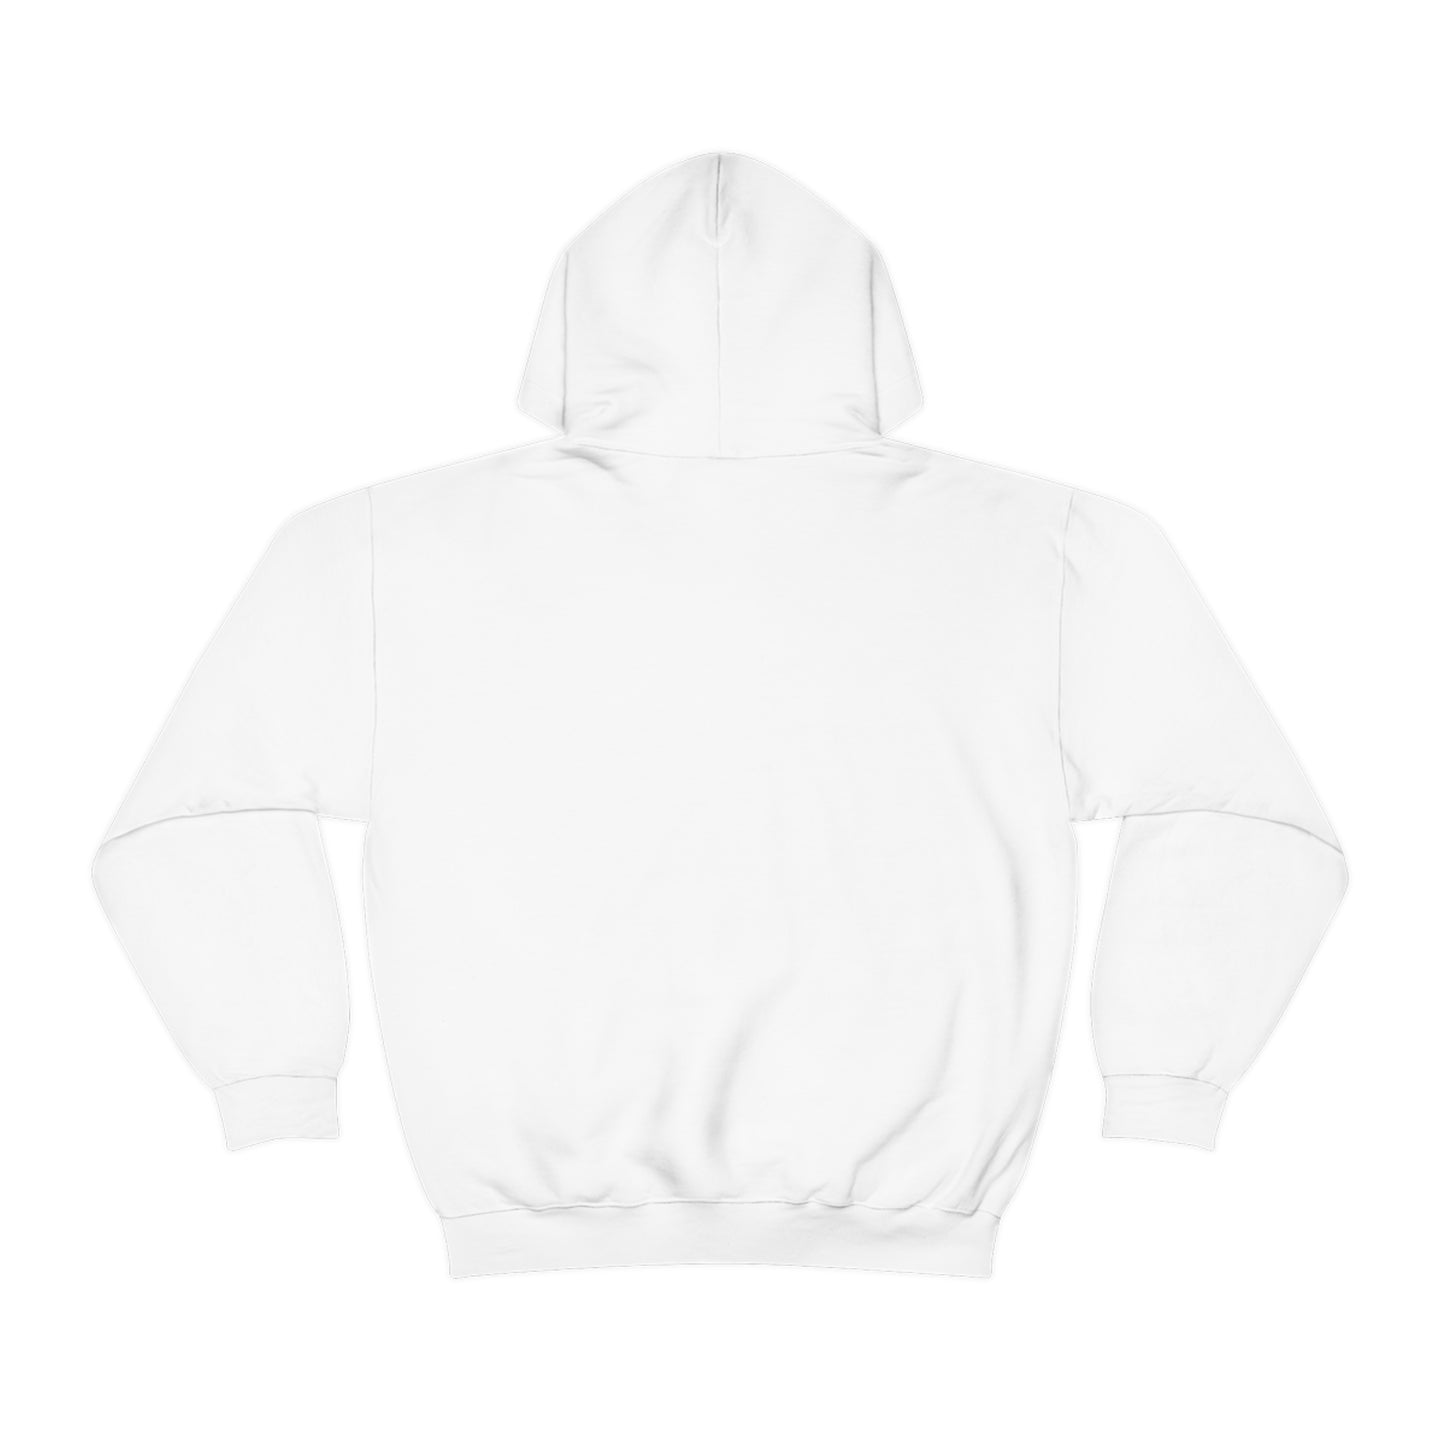 Cool, Calm and Cozy Collection- Blame The Tequila Unisex Heavy Blend™ Hooded Sweatshirt